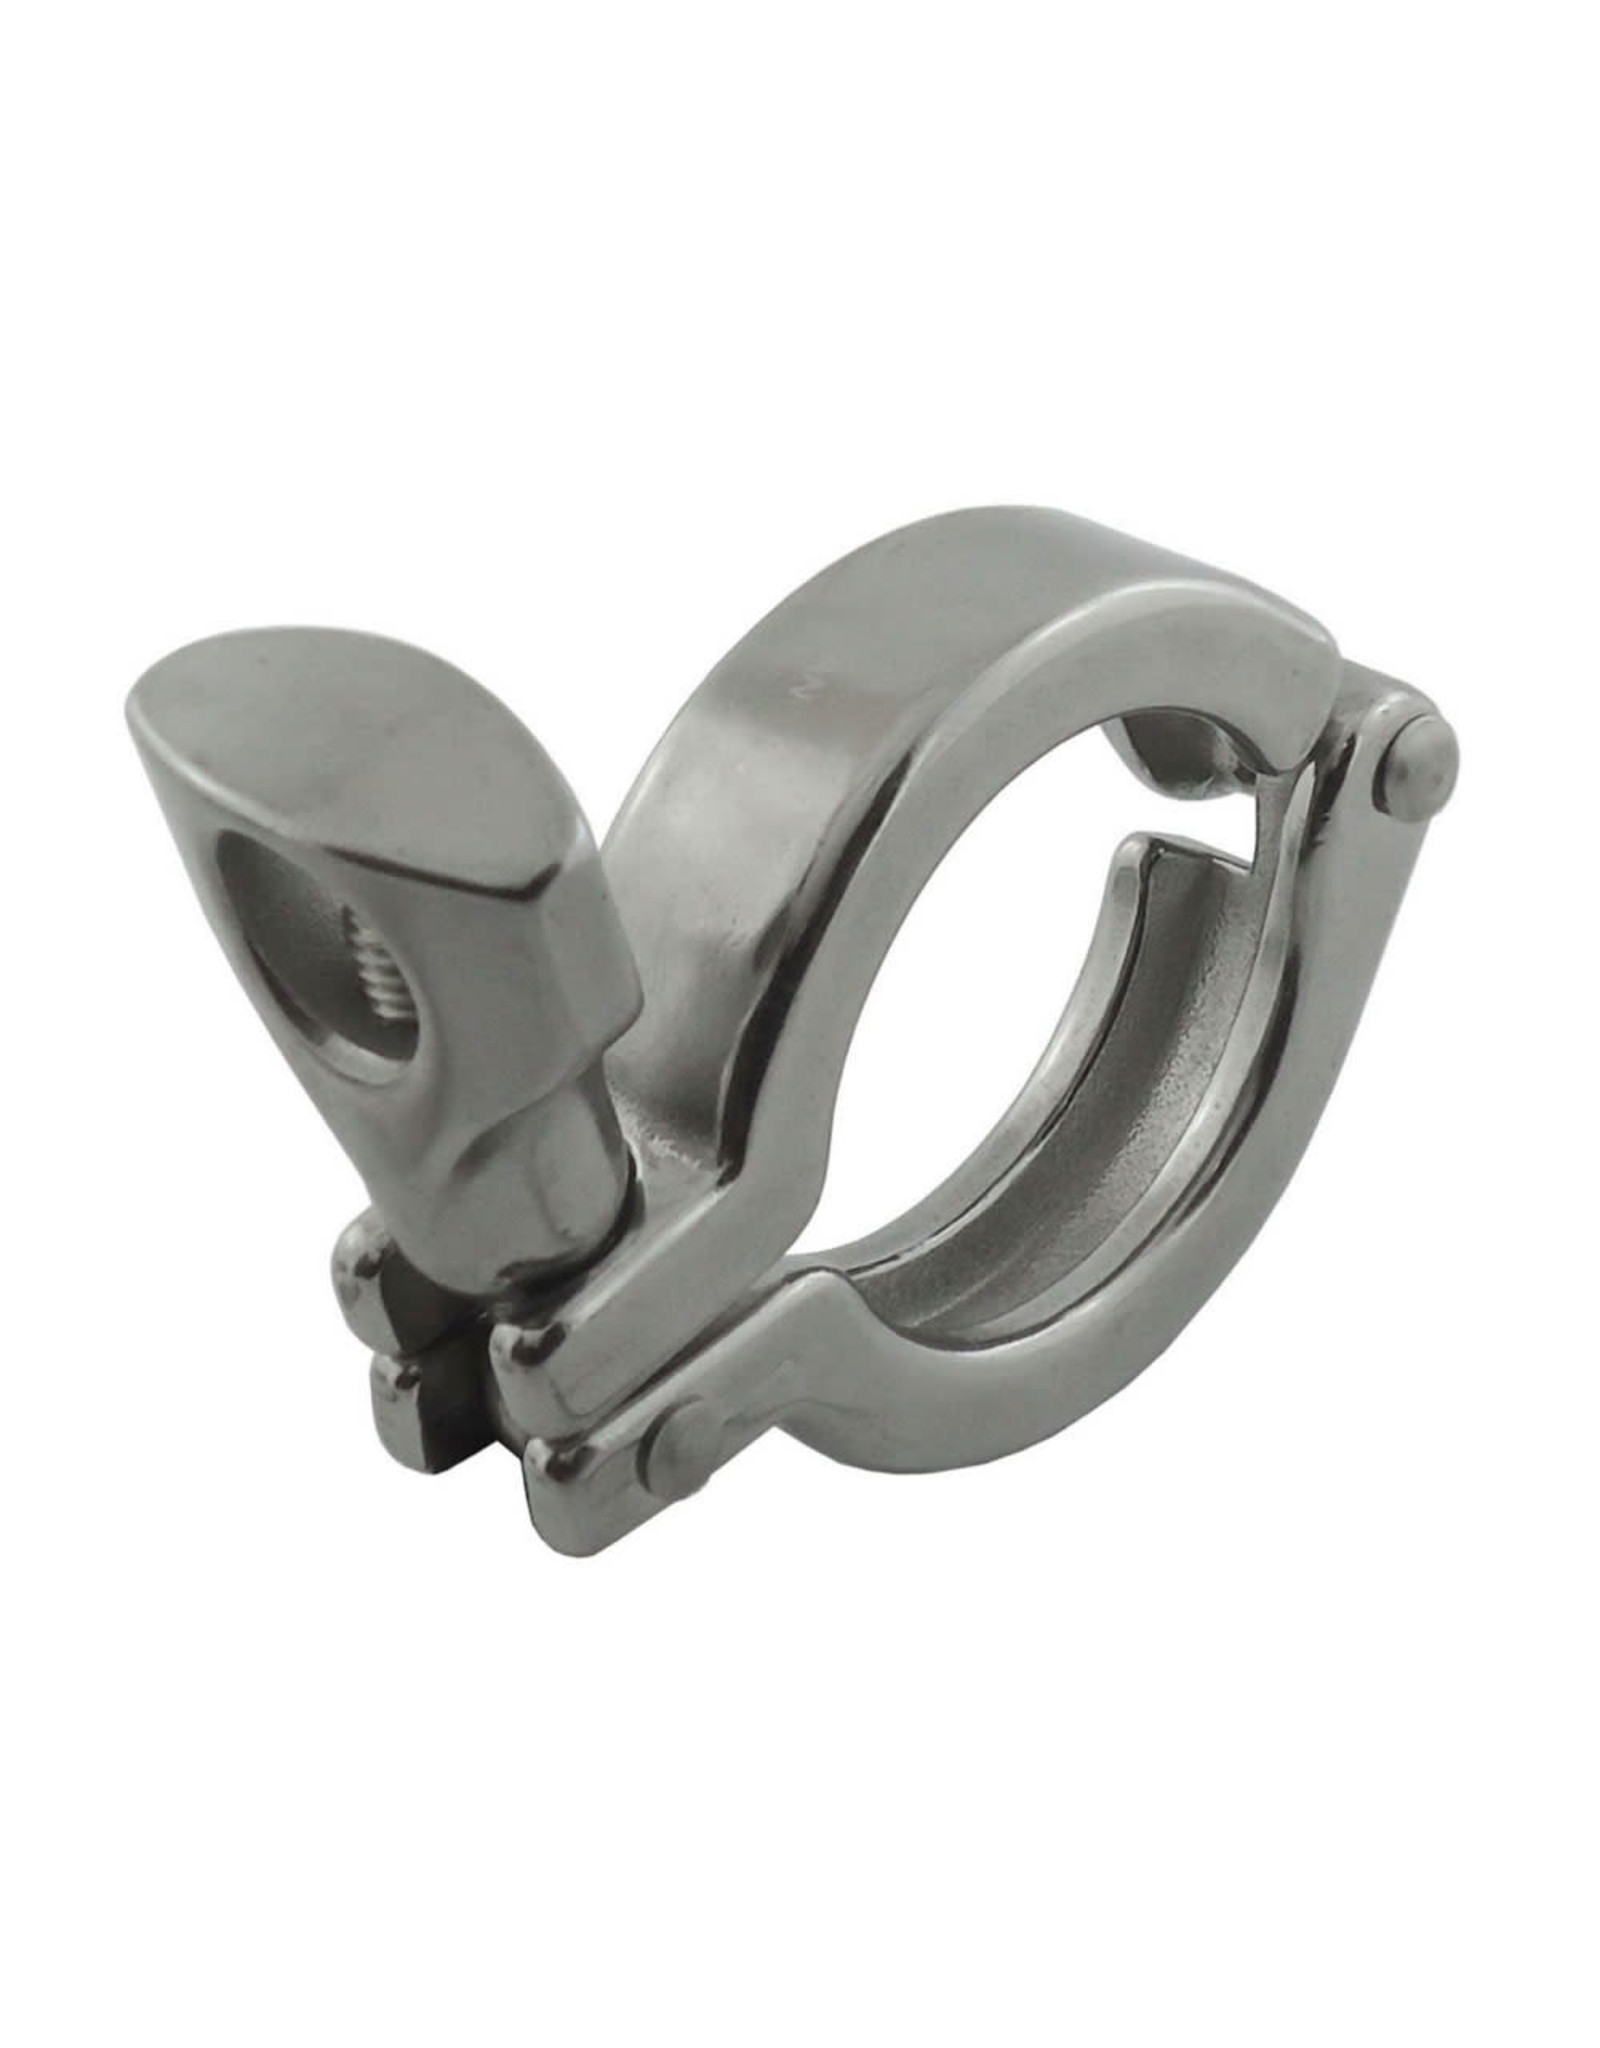 Tri clamp 0.5" / 0.75" Fitting